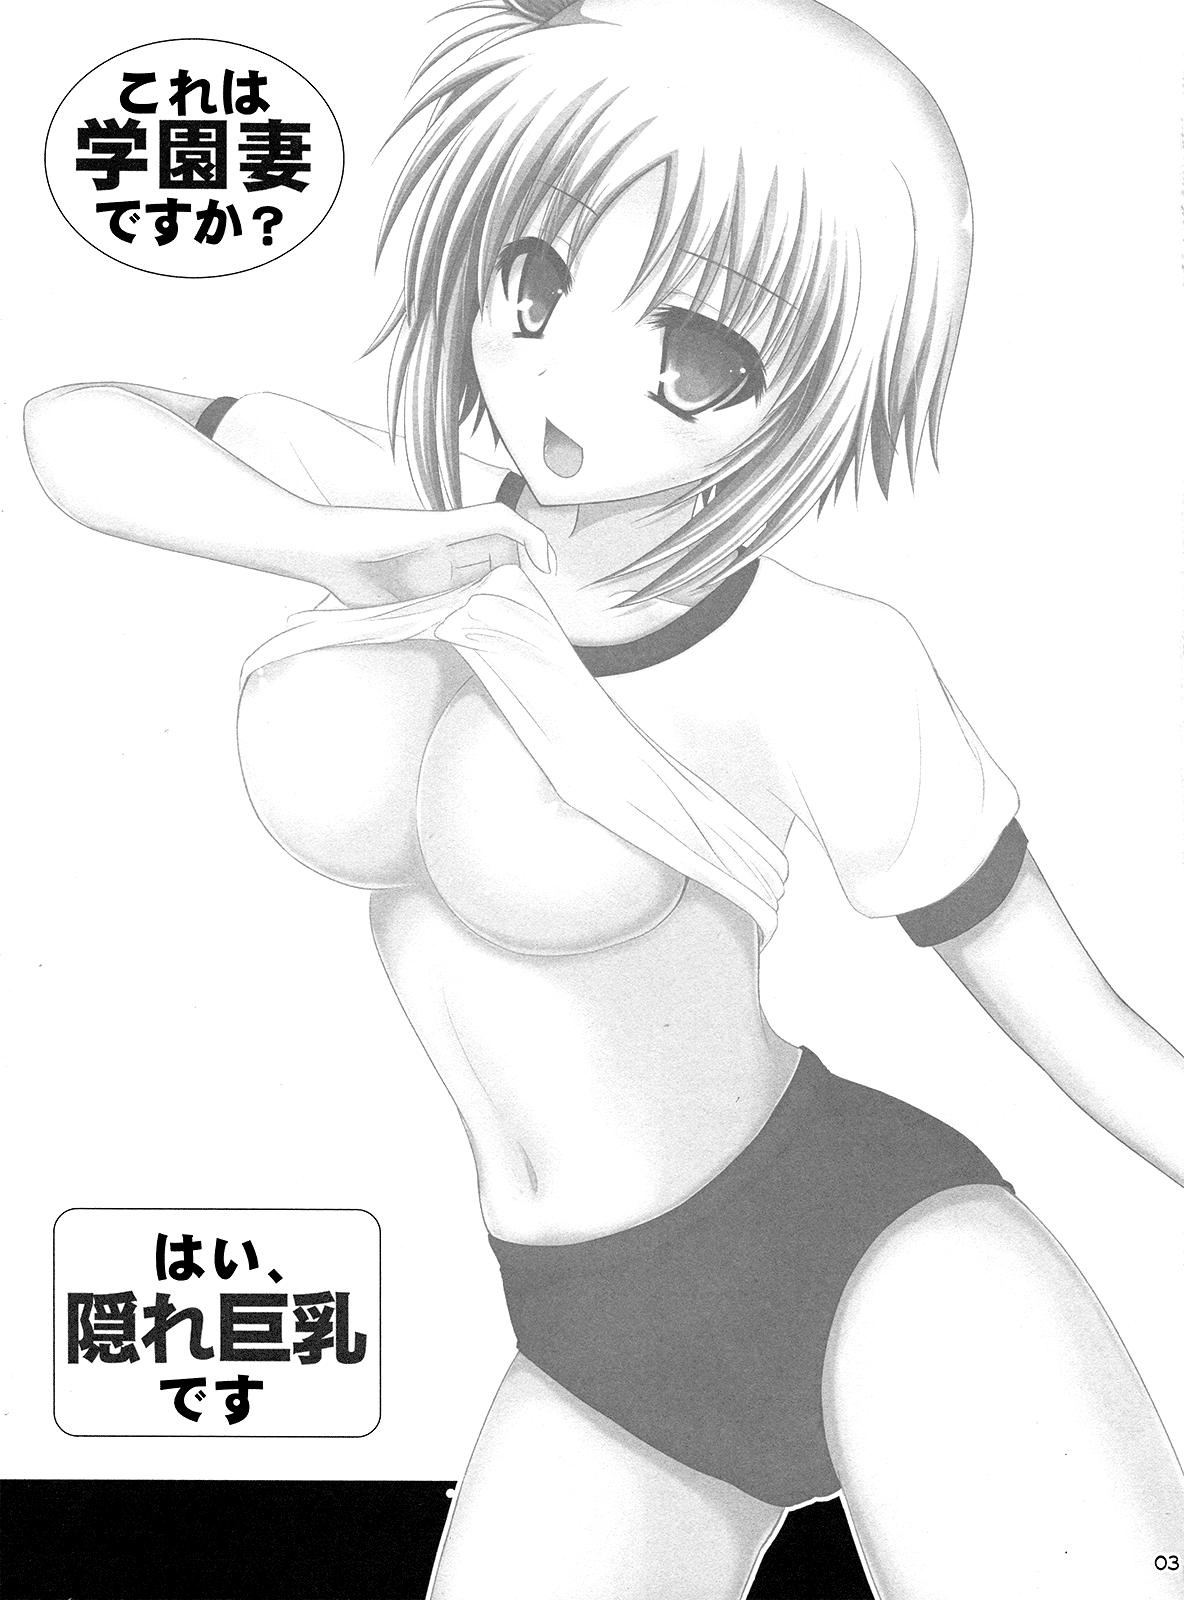 Gros Seins Is This A School Wife? Yes, She Secretly Has Big Breasts - Kore wa zombie desu ka Hairy - Page 2